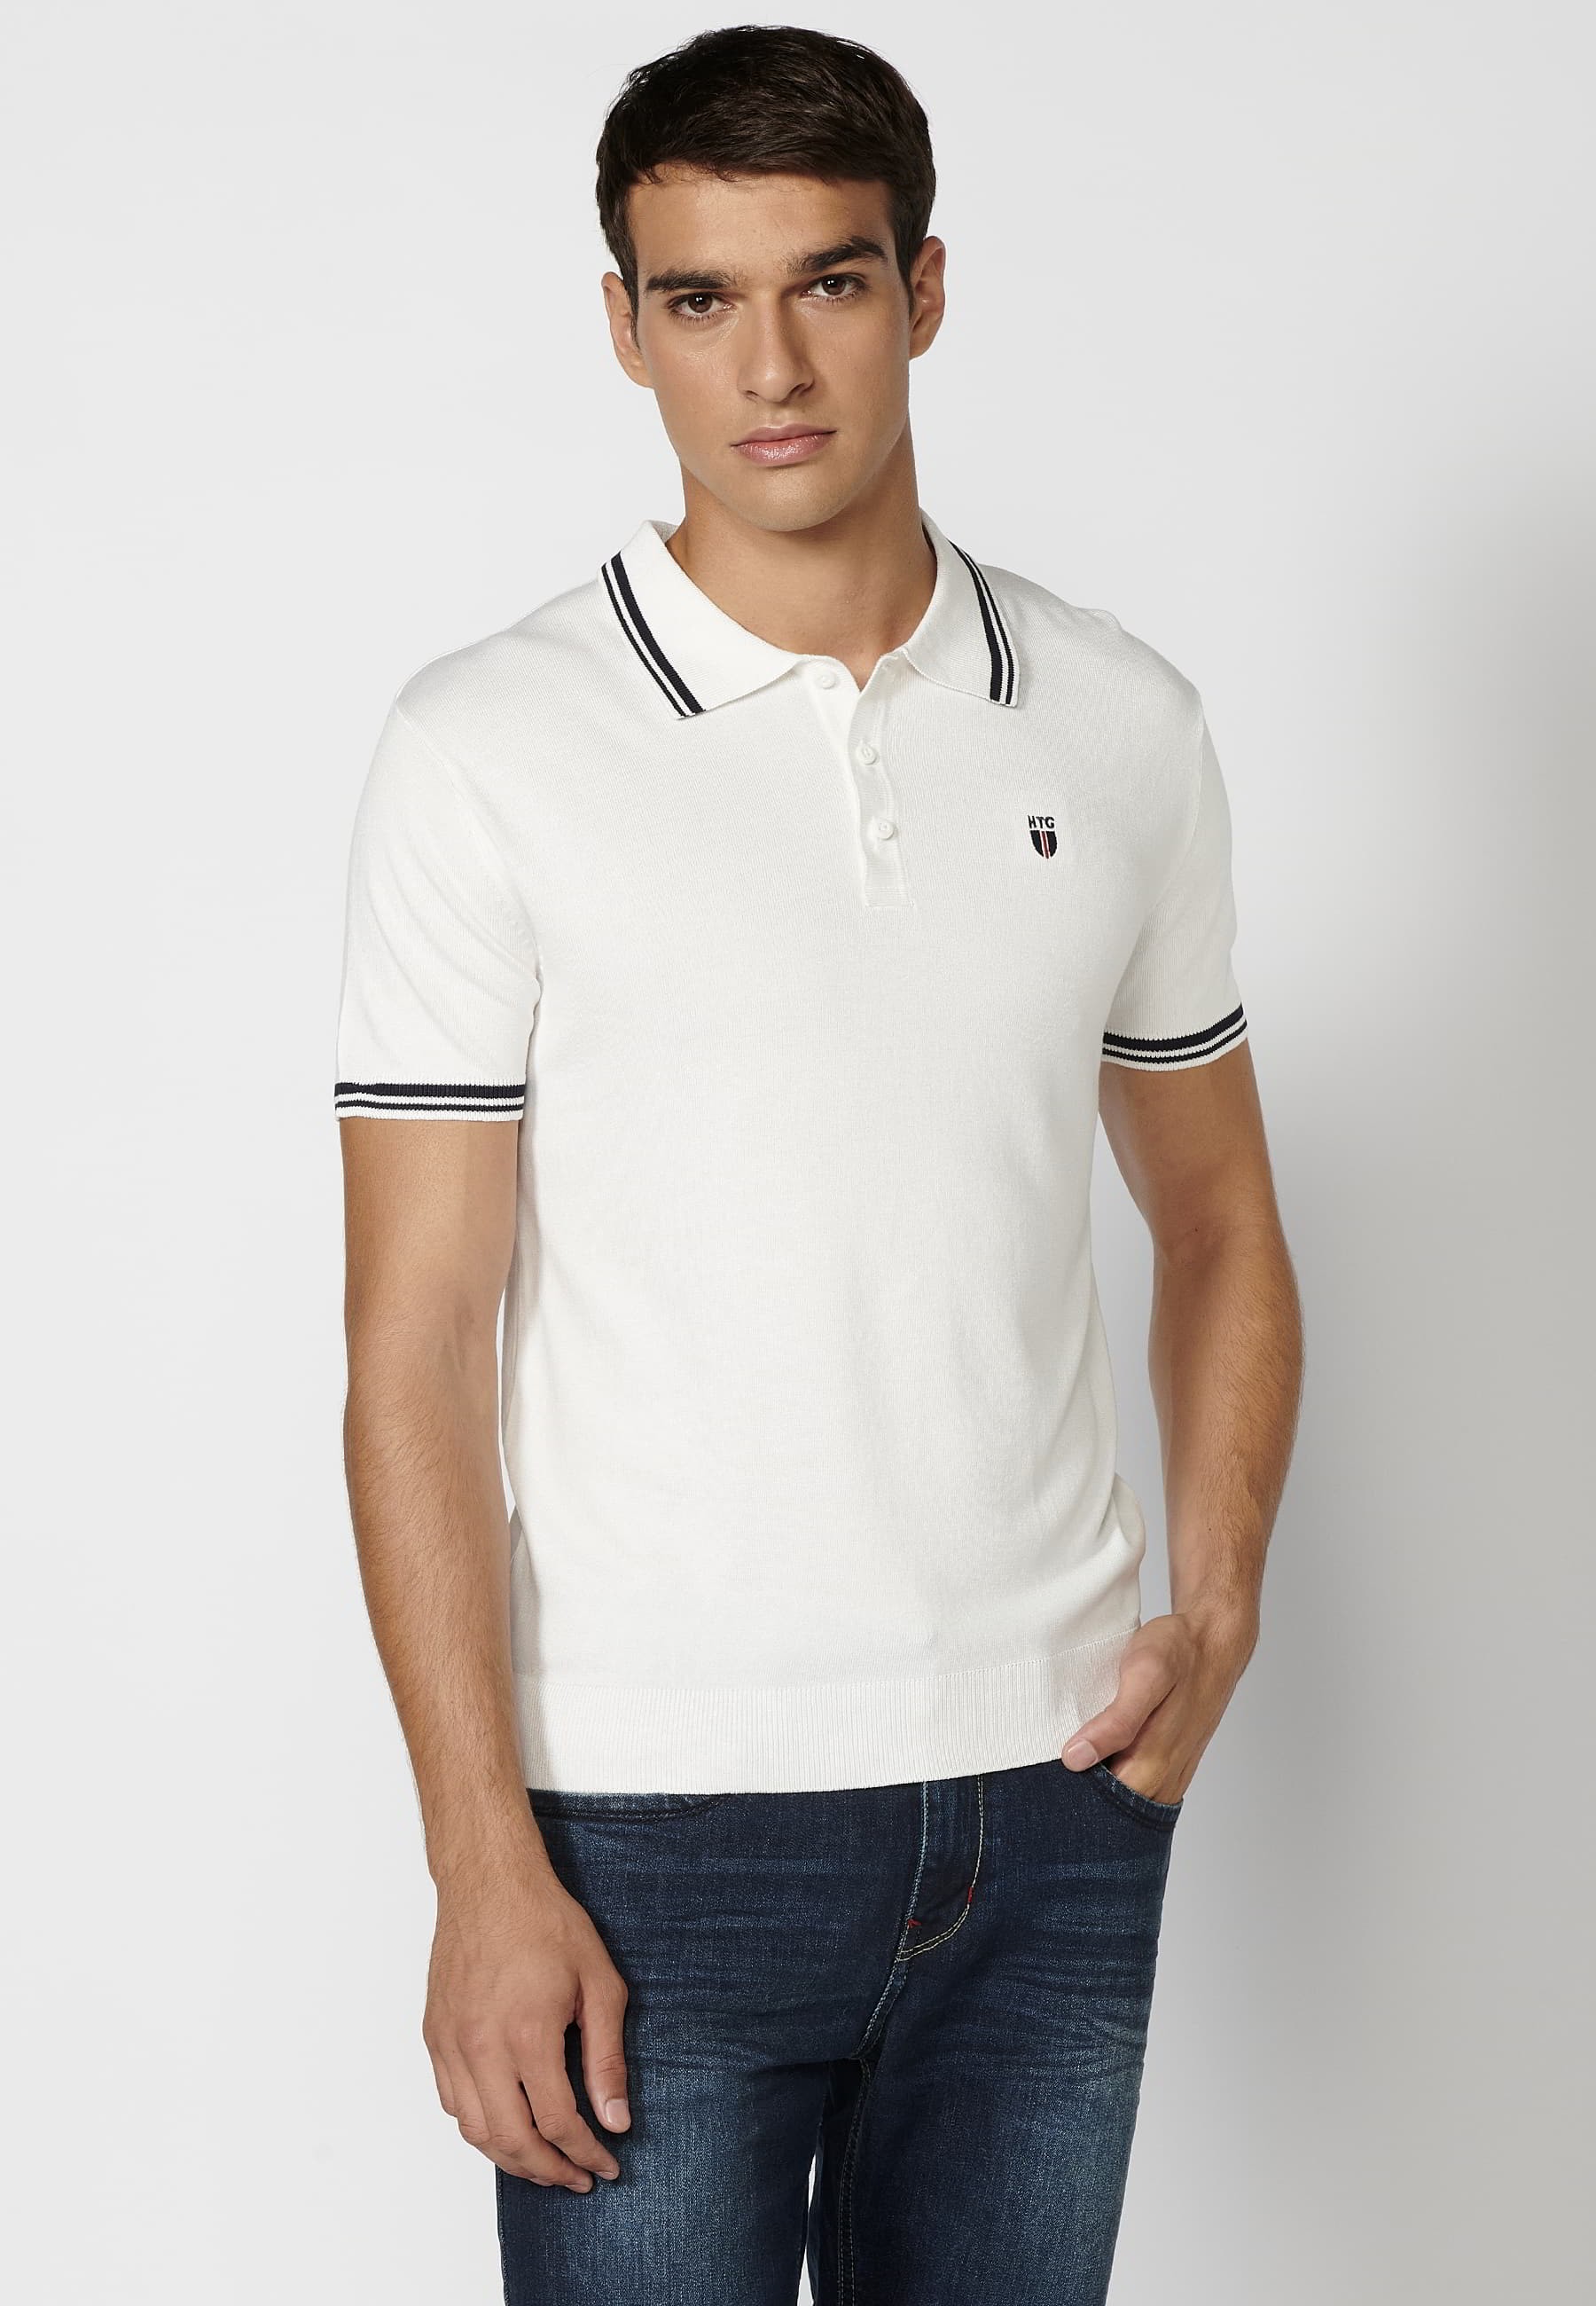 Short-sleeved knitted polo shirt with shirt collar in Ecru for Men